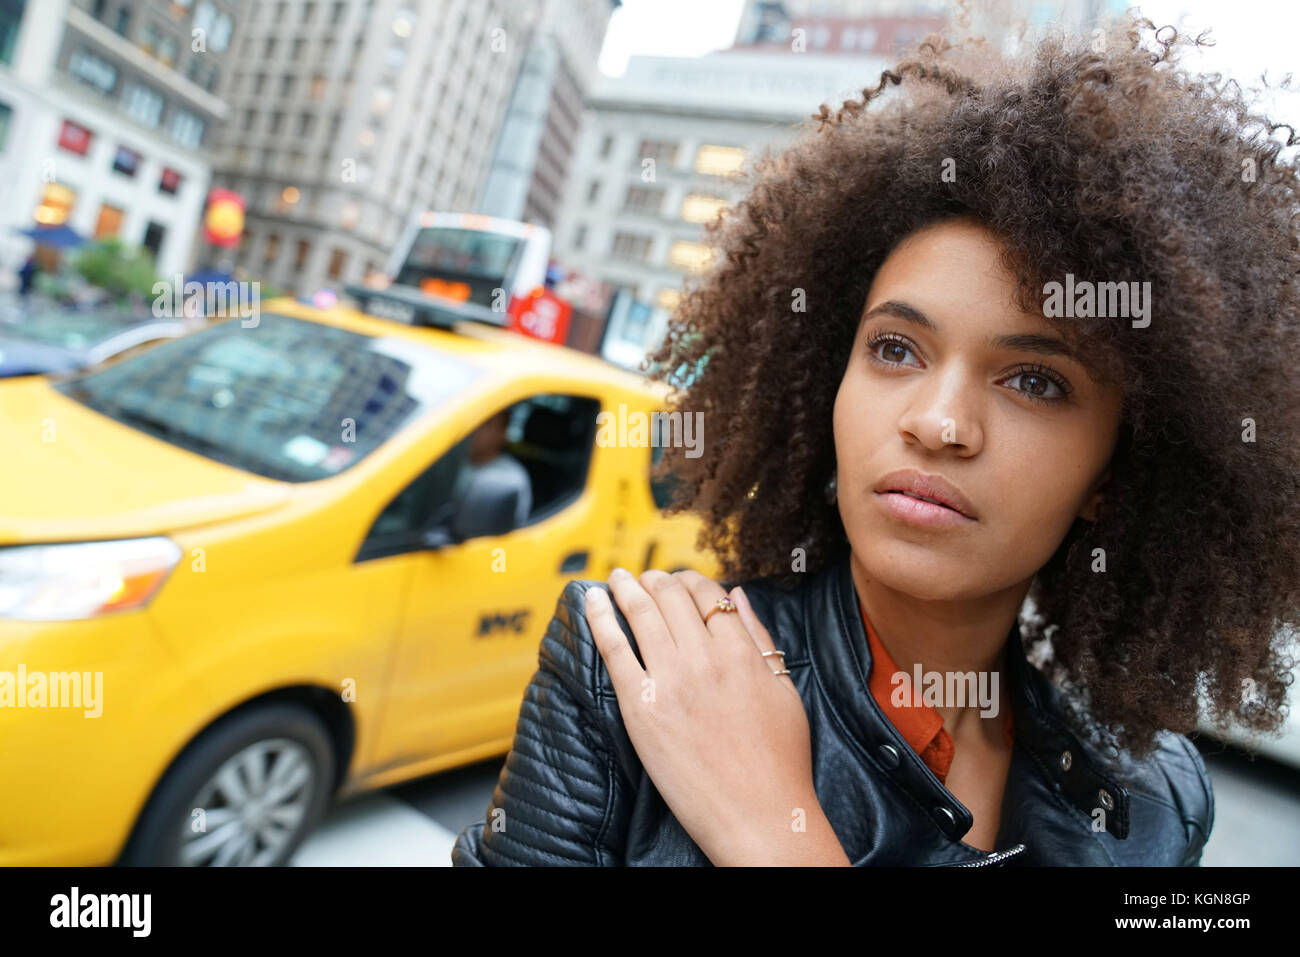 Portrait of mixed-raced girl waiting in street Stock Photo